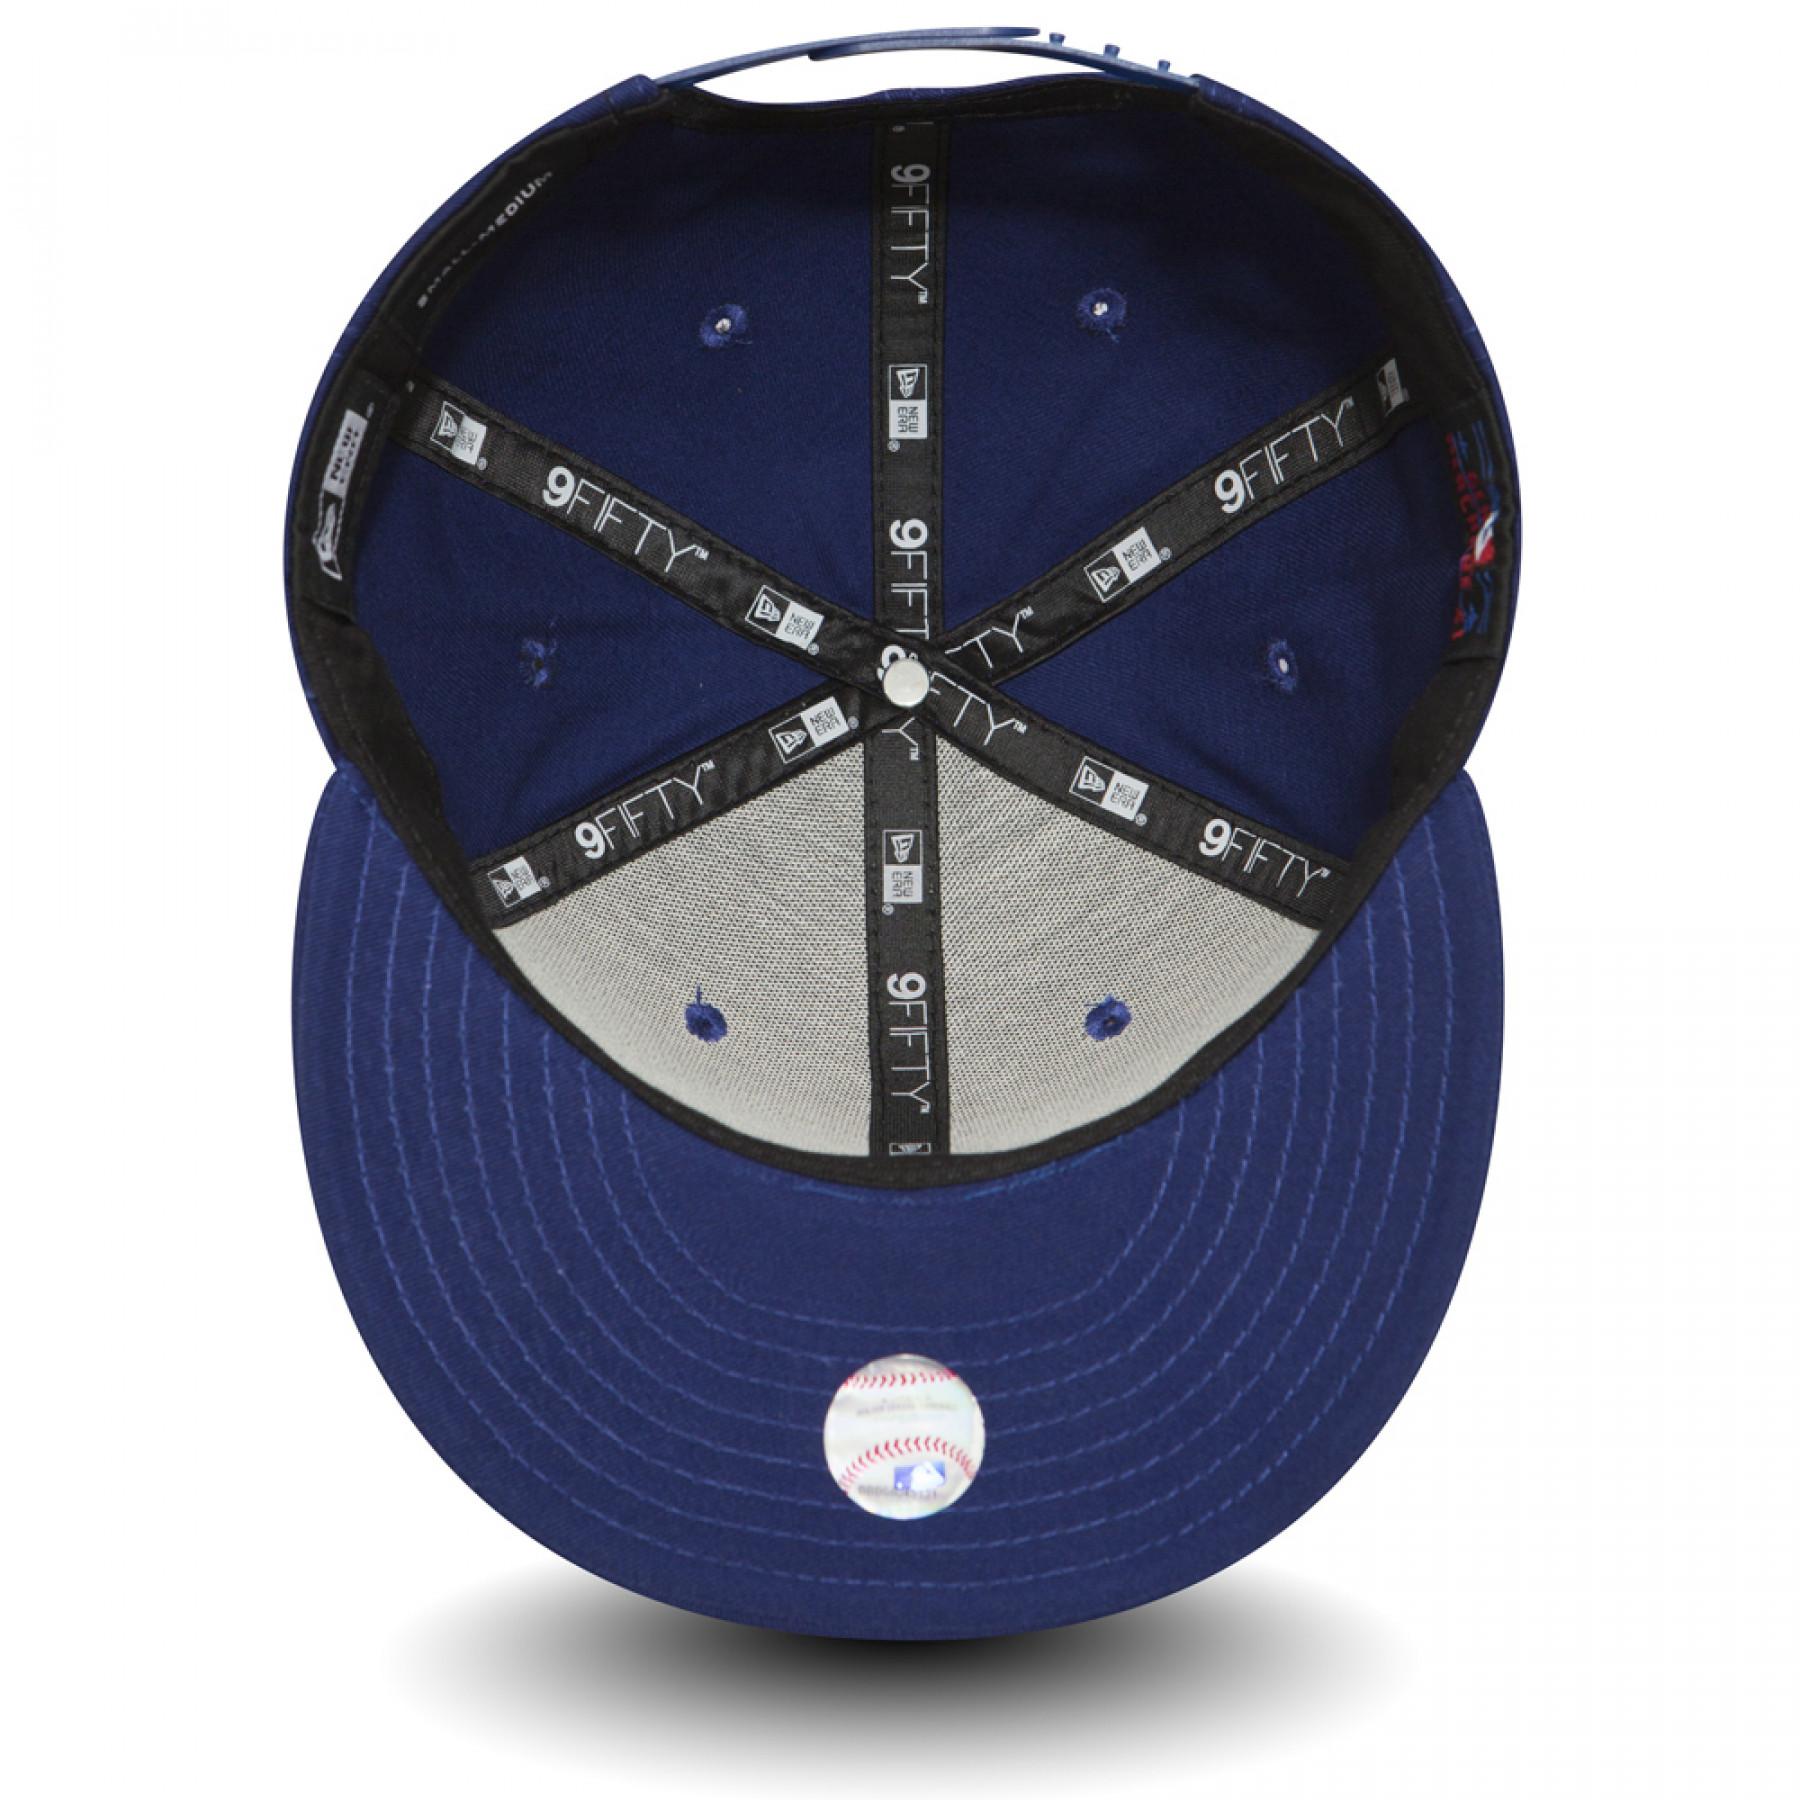 Casquette New Era 9fifty Mlb Team Los Angeles Dodgers